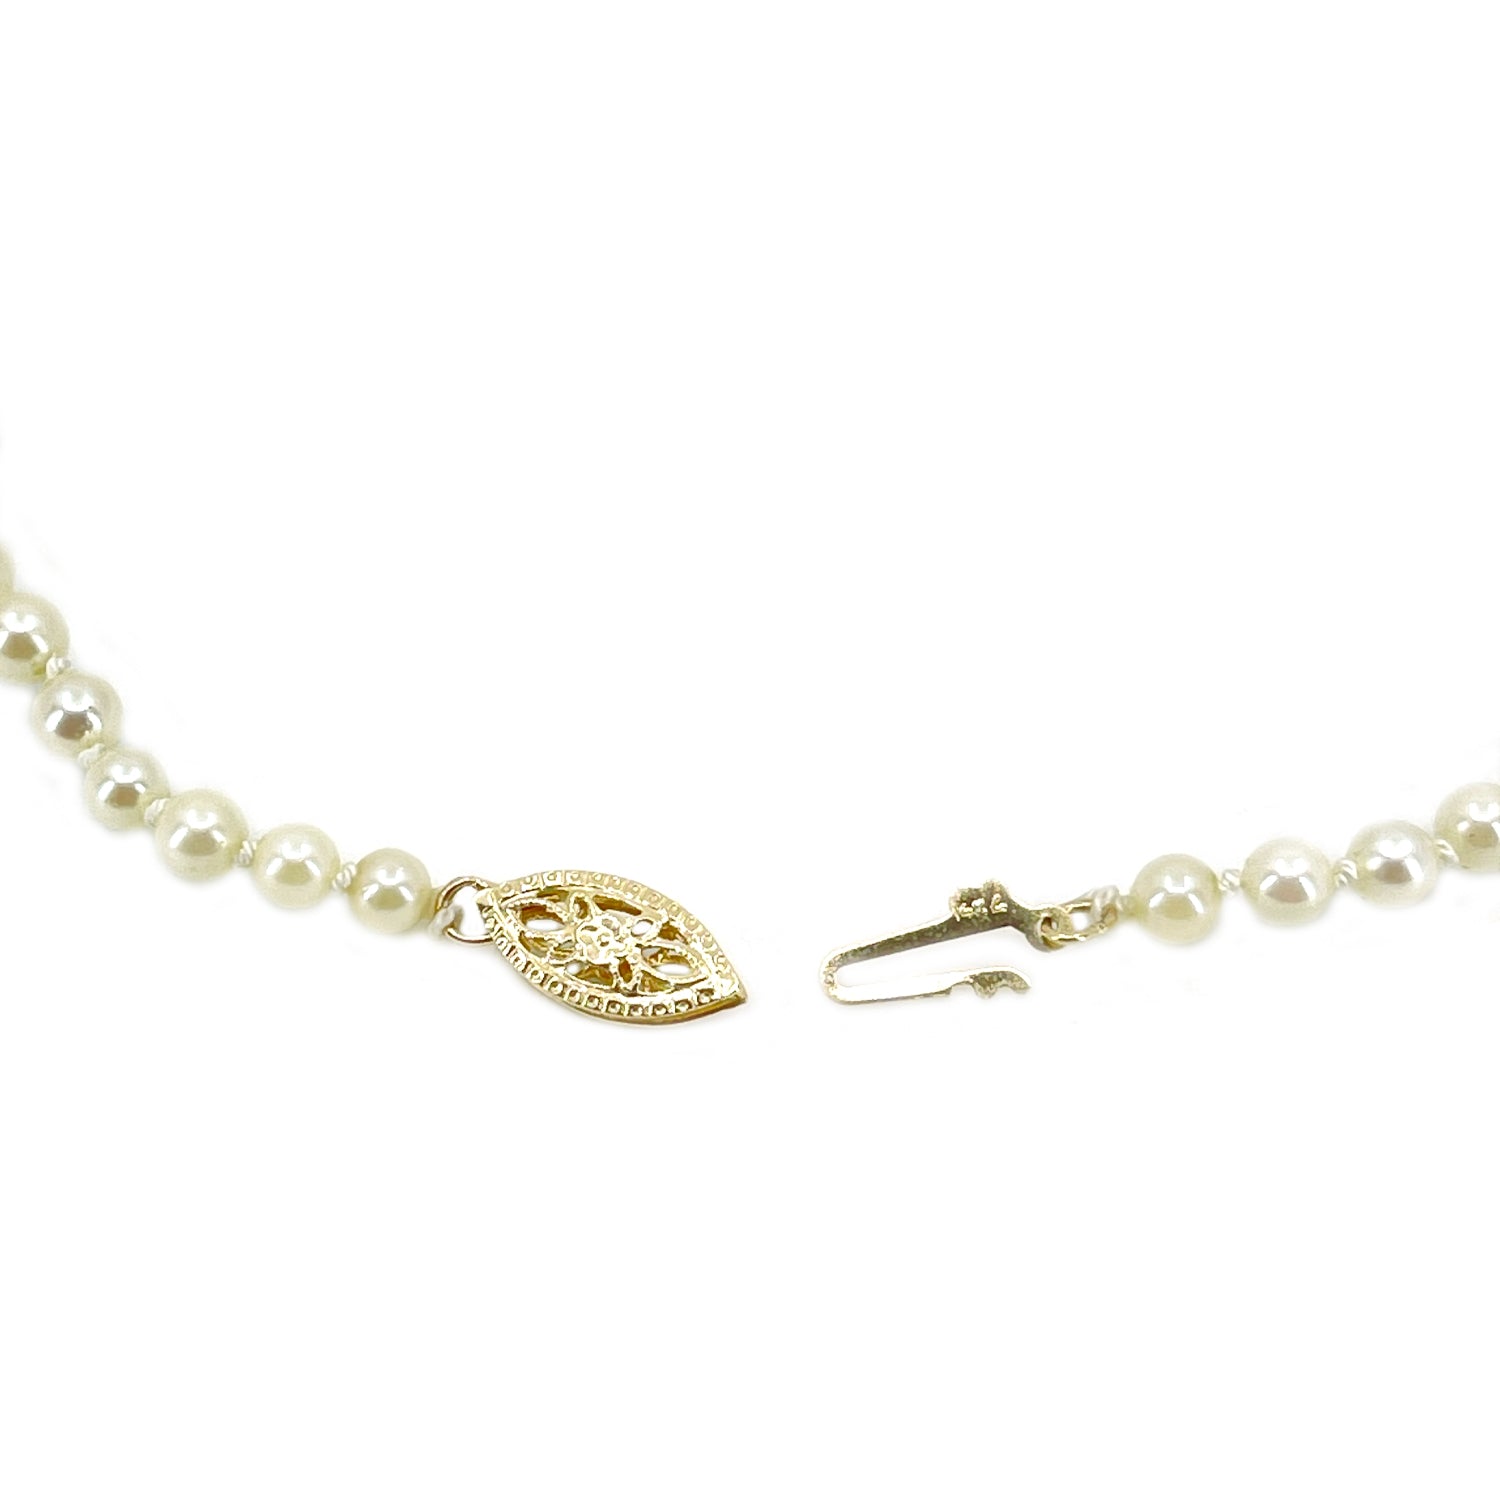 Vintage Graduated Japanese Cultured Saltwater Akoya Pearl Floral Necklace - 14K Yellow Gold 20.50 Inch